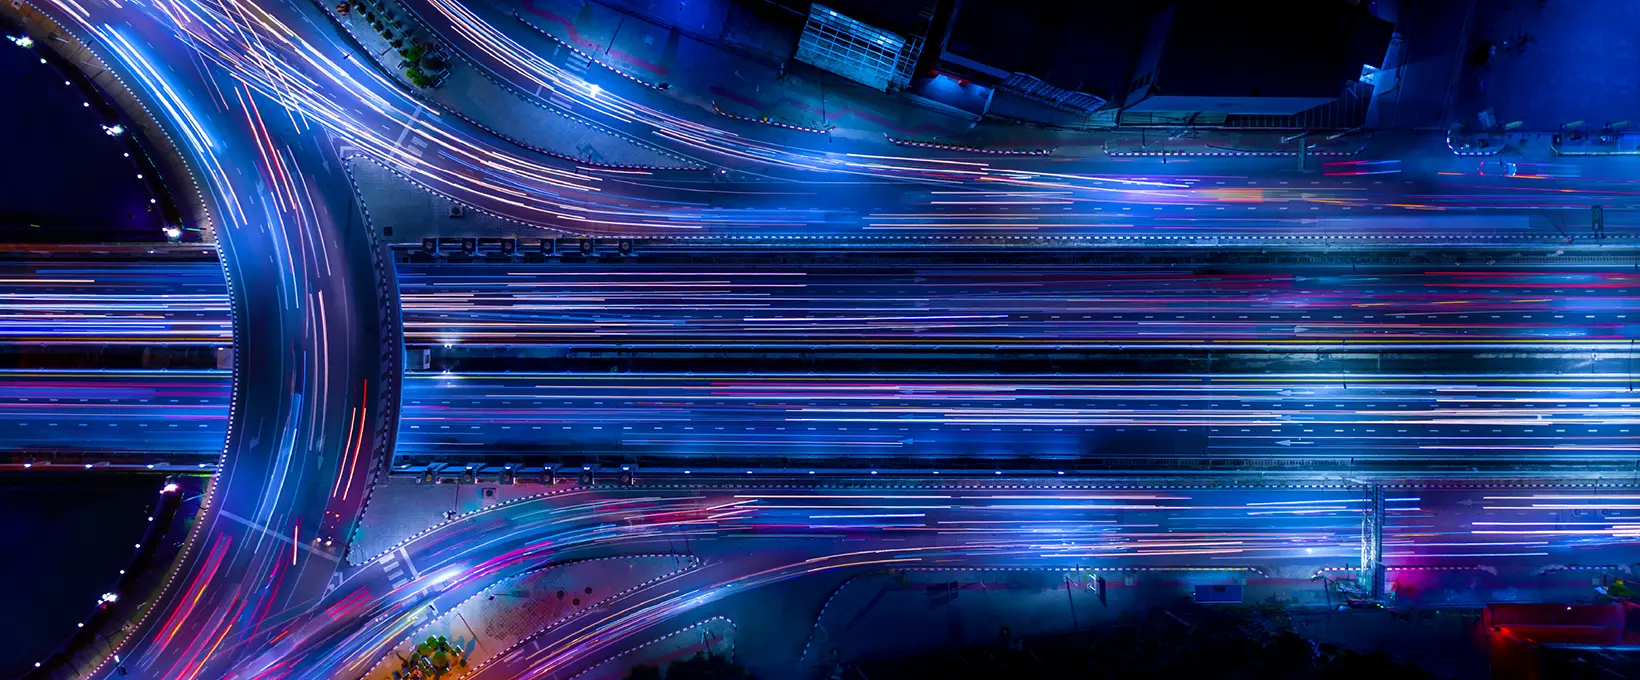 Time lapse aerial photo of traffic on freeway interchange in blues and purples